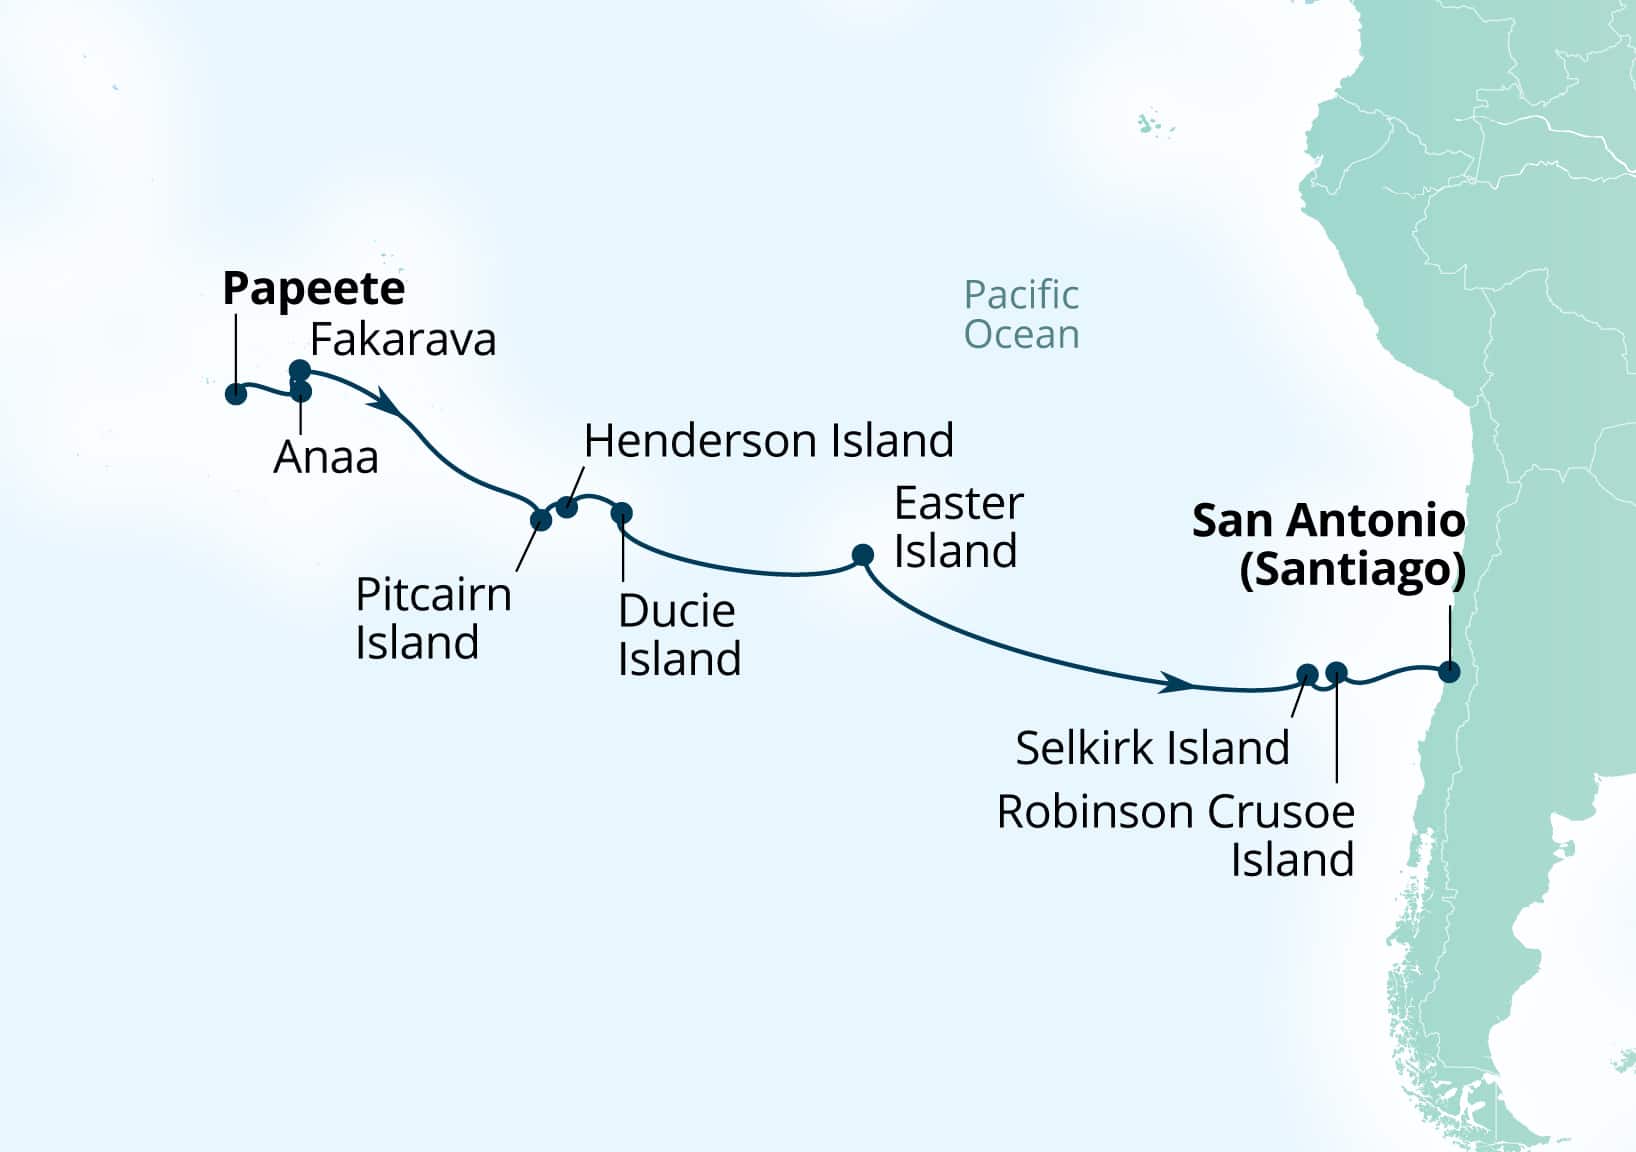 MapDepicting 20-Day Easter & Pitcairn Islands: Marooned, Moai & Mutineers Departs San Antonio (Santiago), Chile Arrive Papeete, French Polynesia